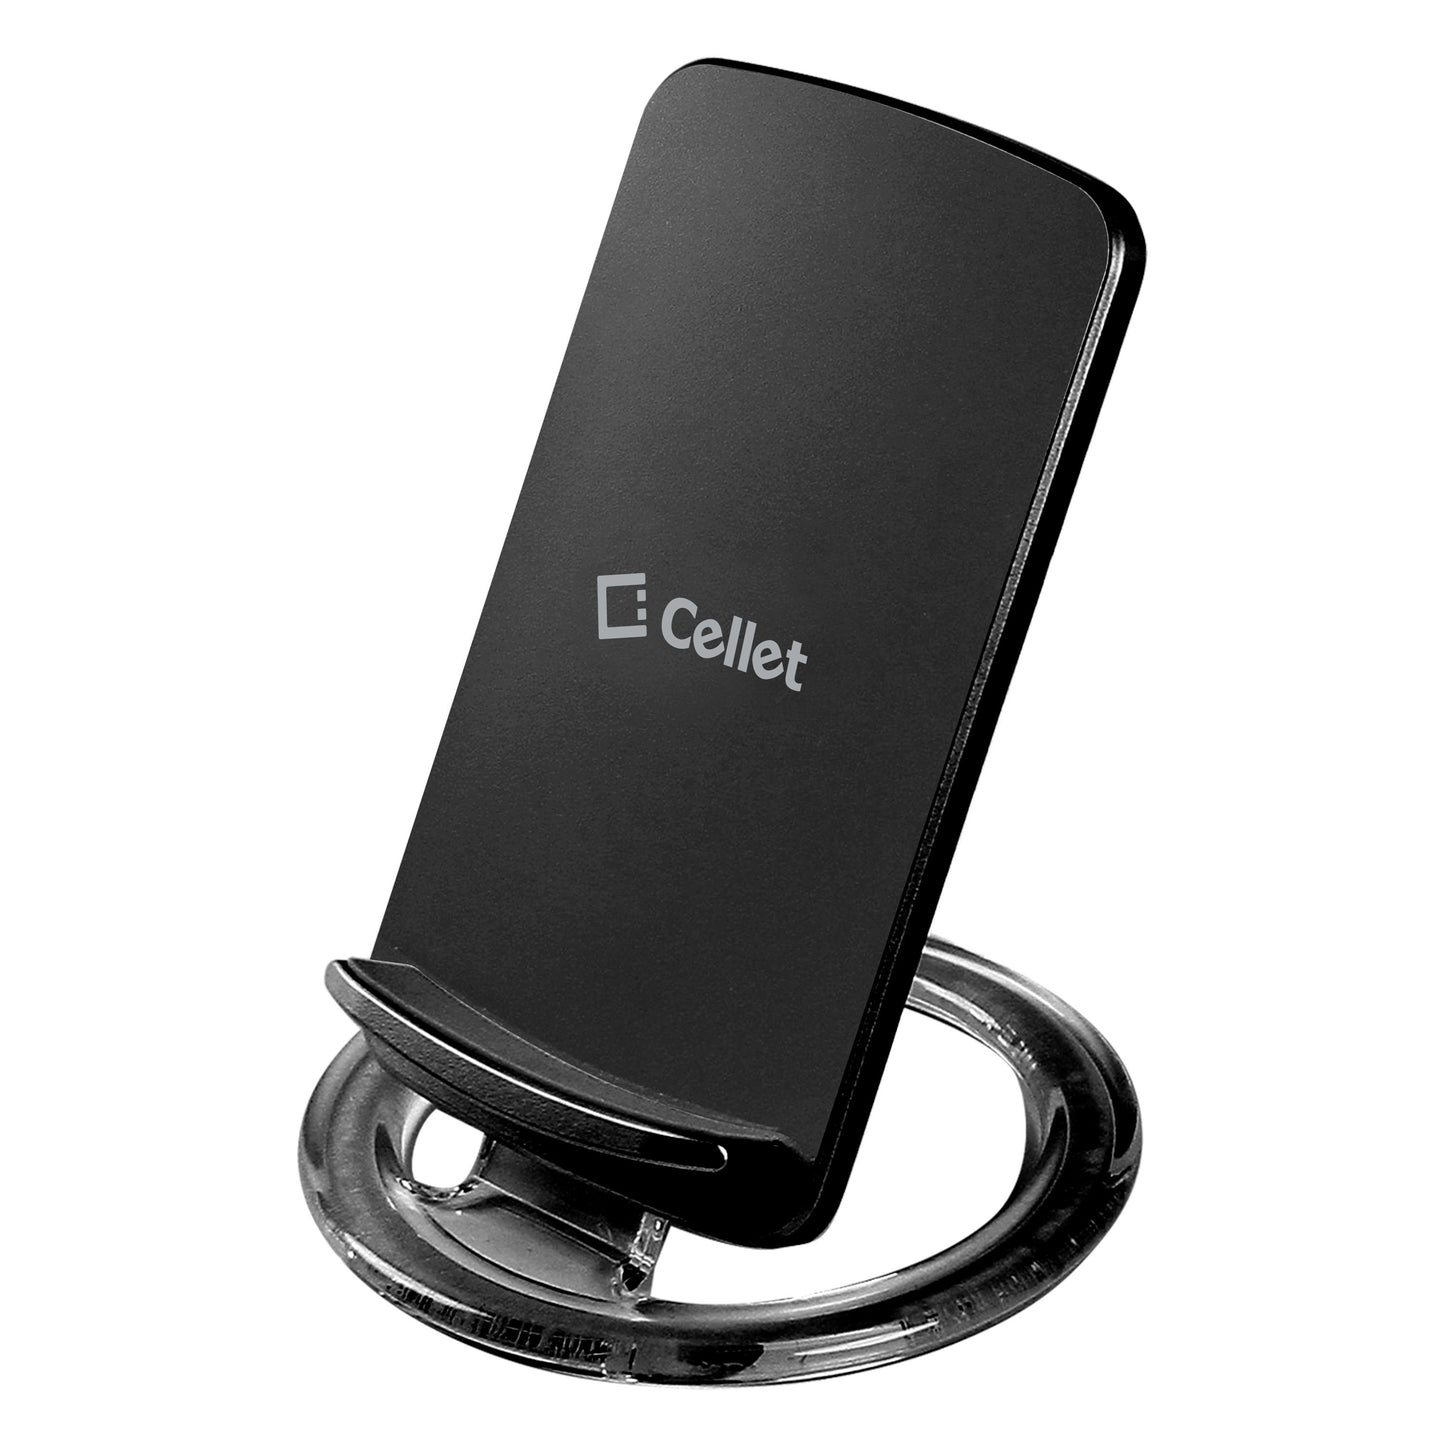 QI300BK - Wireless Charging Pad, Cellet Adjustable Dual Coil Wireless Charging Stand for all Wireless (Qi) Enabled Devices - Black